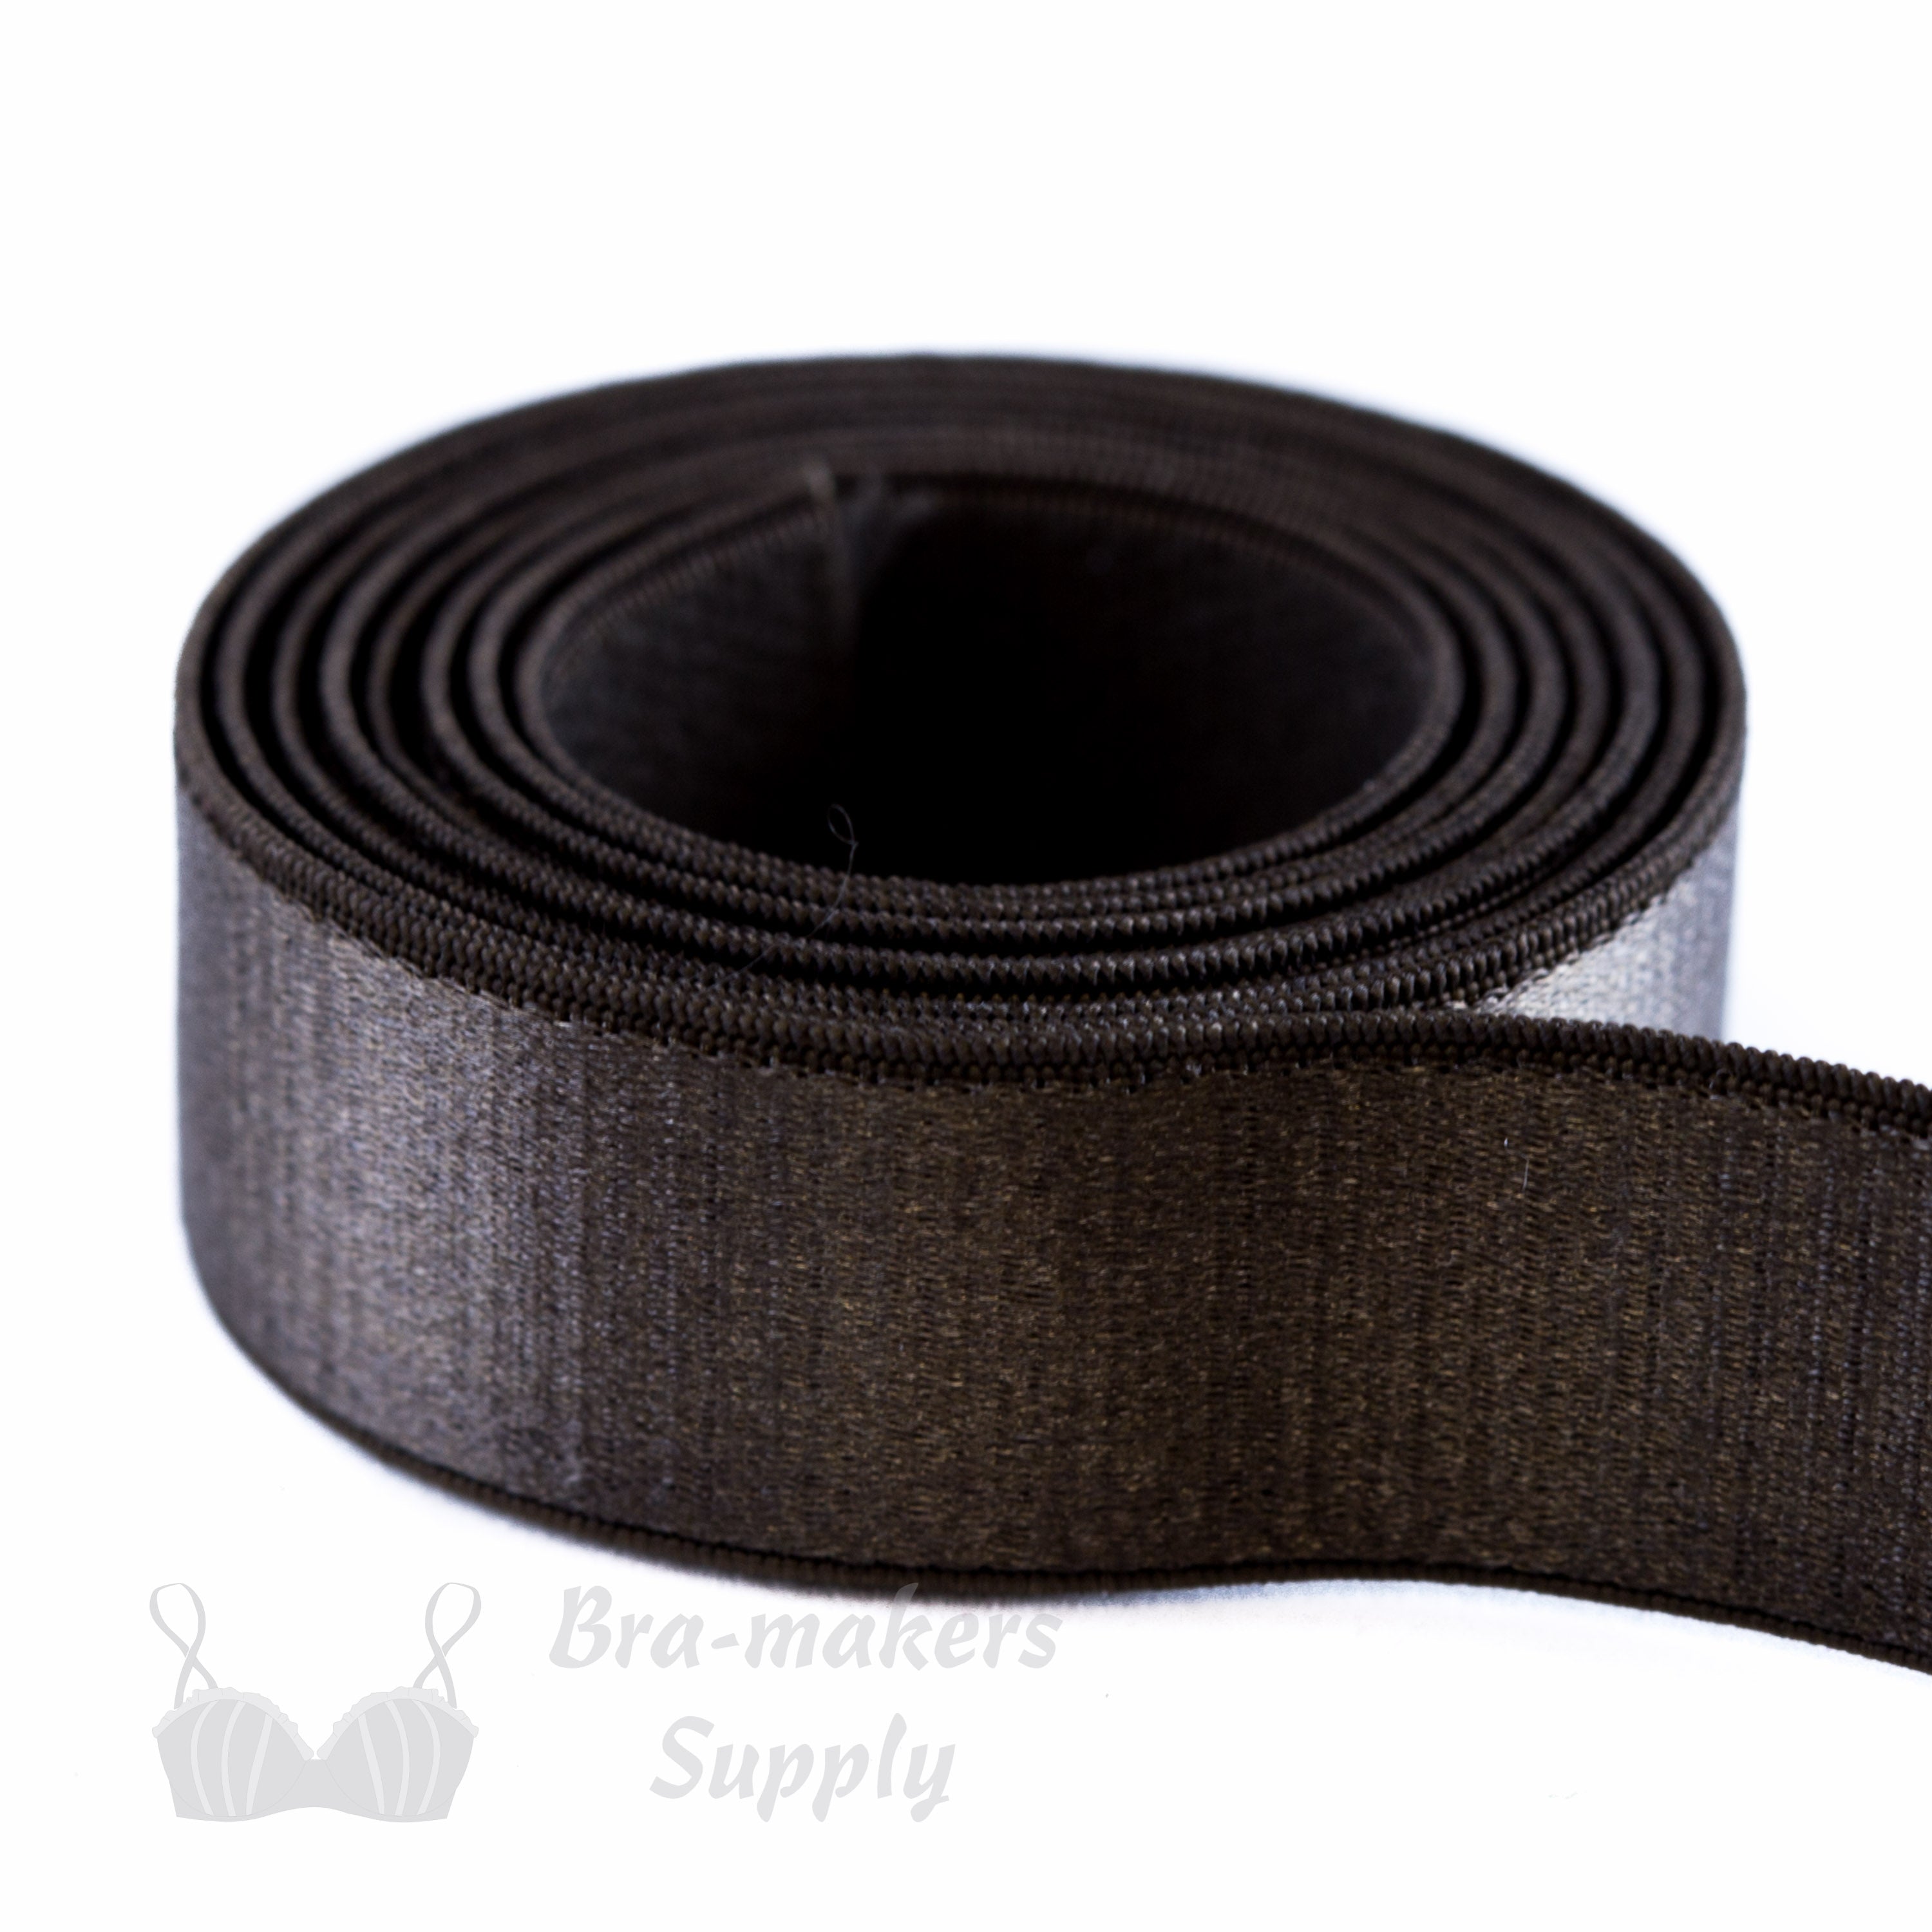 https://themakehouse.ca/cdn/shop/products/three-quarters-inch-19mm-Strap-Elastic-chocolate-ES-6-or-three-quarters-inch-19mm-Satin-Strap-Elastic-seal-brown-Pantone-19-1314-from-Bra-makers-Suppy-1-metre-roll-shown_3000x.jpg?v=1608073311